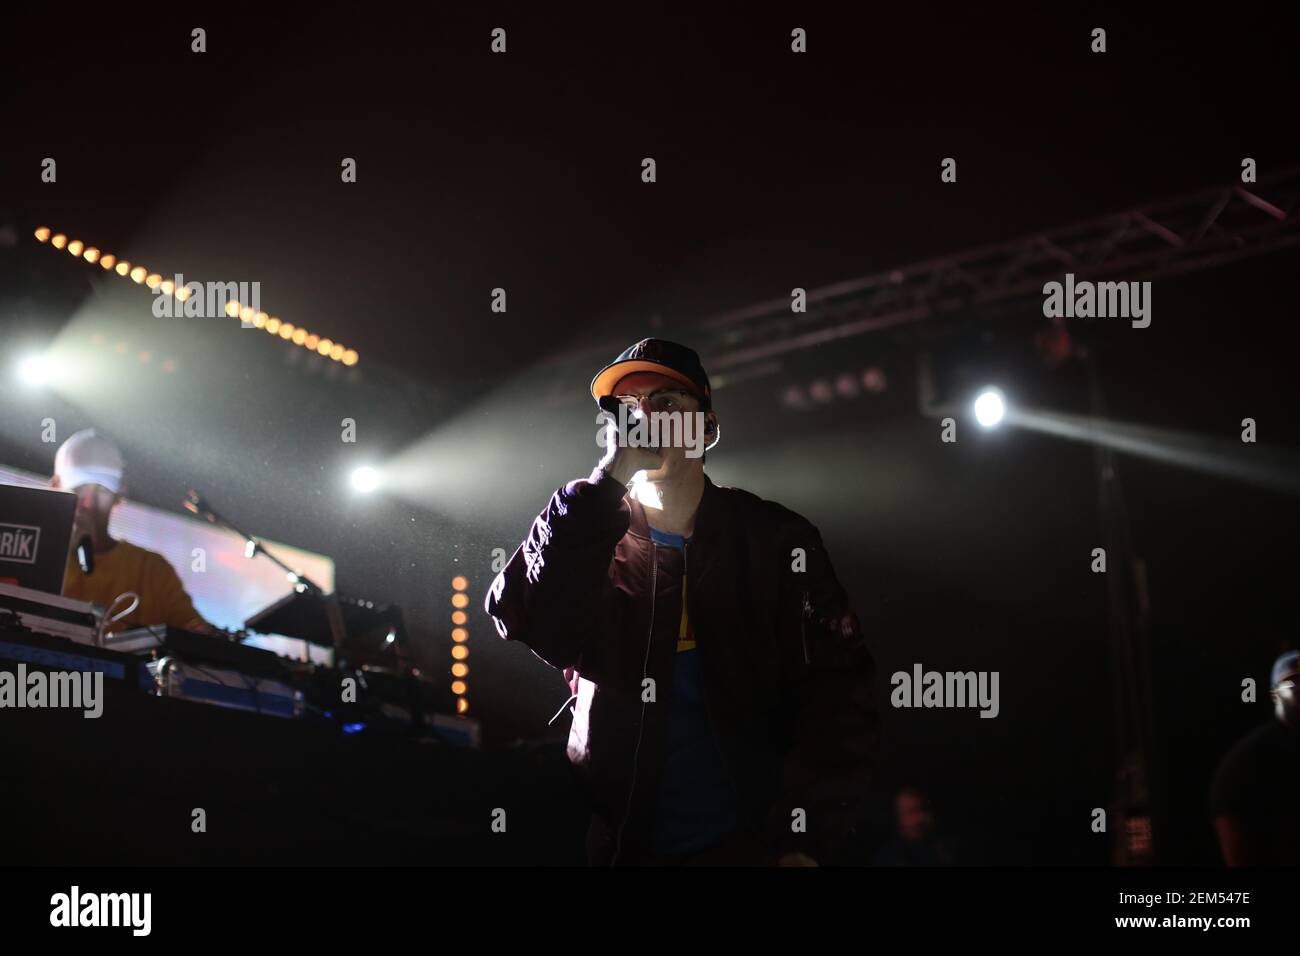 The rapper known as Logic (real name Robert Bryson Hall II) performing ...